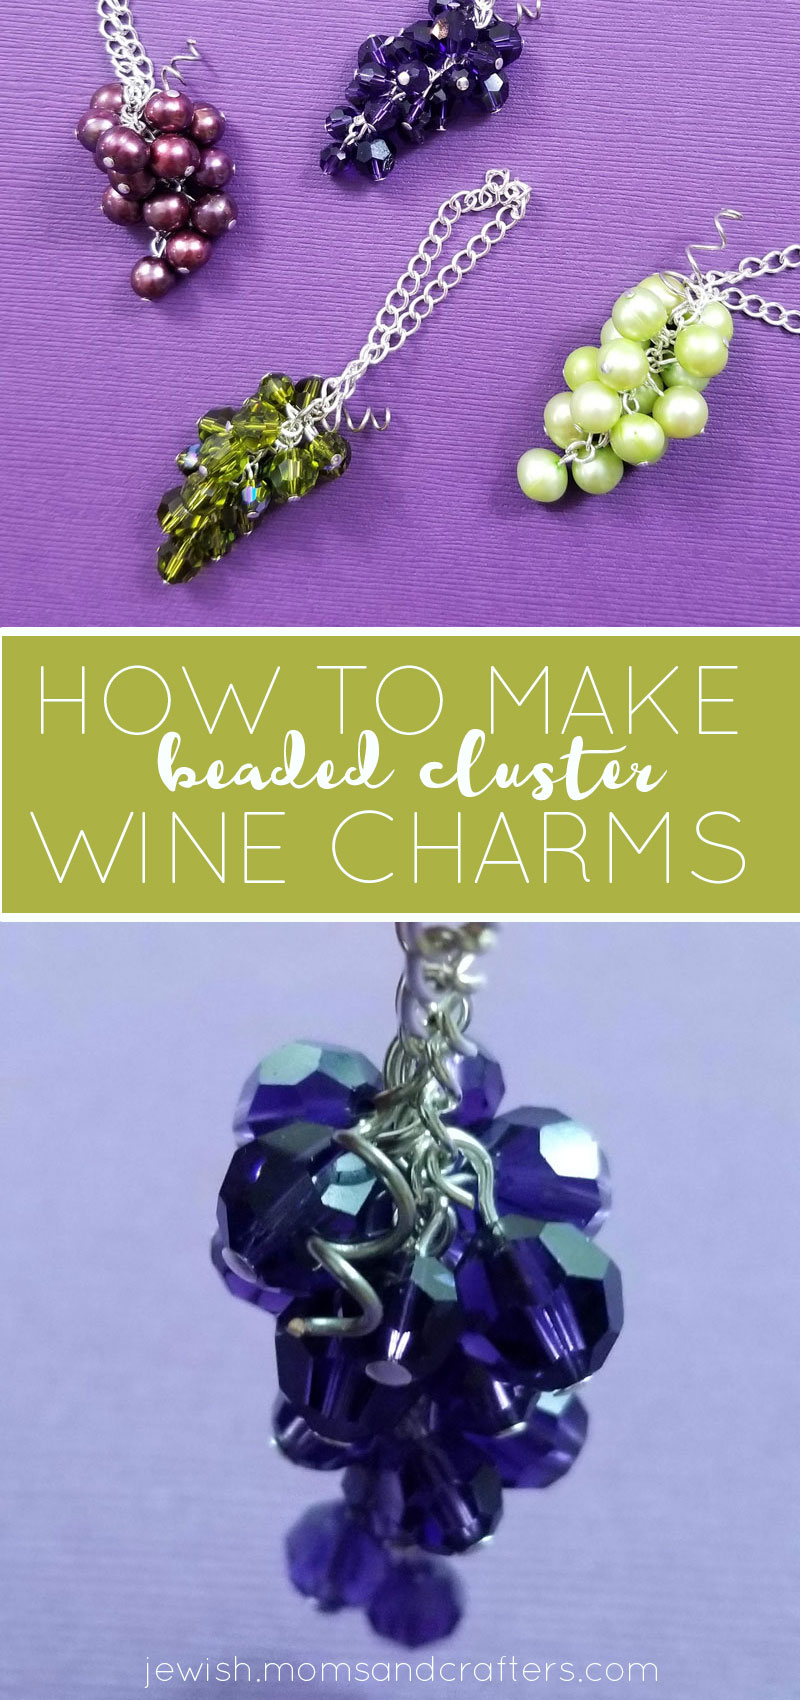 Click to learn how to make your own DIY wine bottle charms - a fun beading tutorial and Passover decoration idea. Great for other celebrations - a New Year's hostess gift, etc.